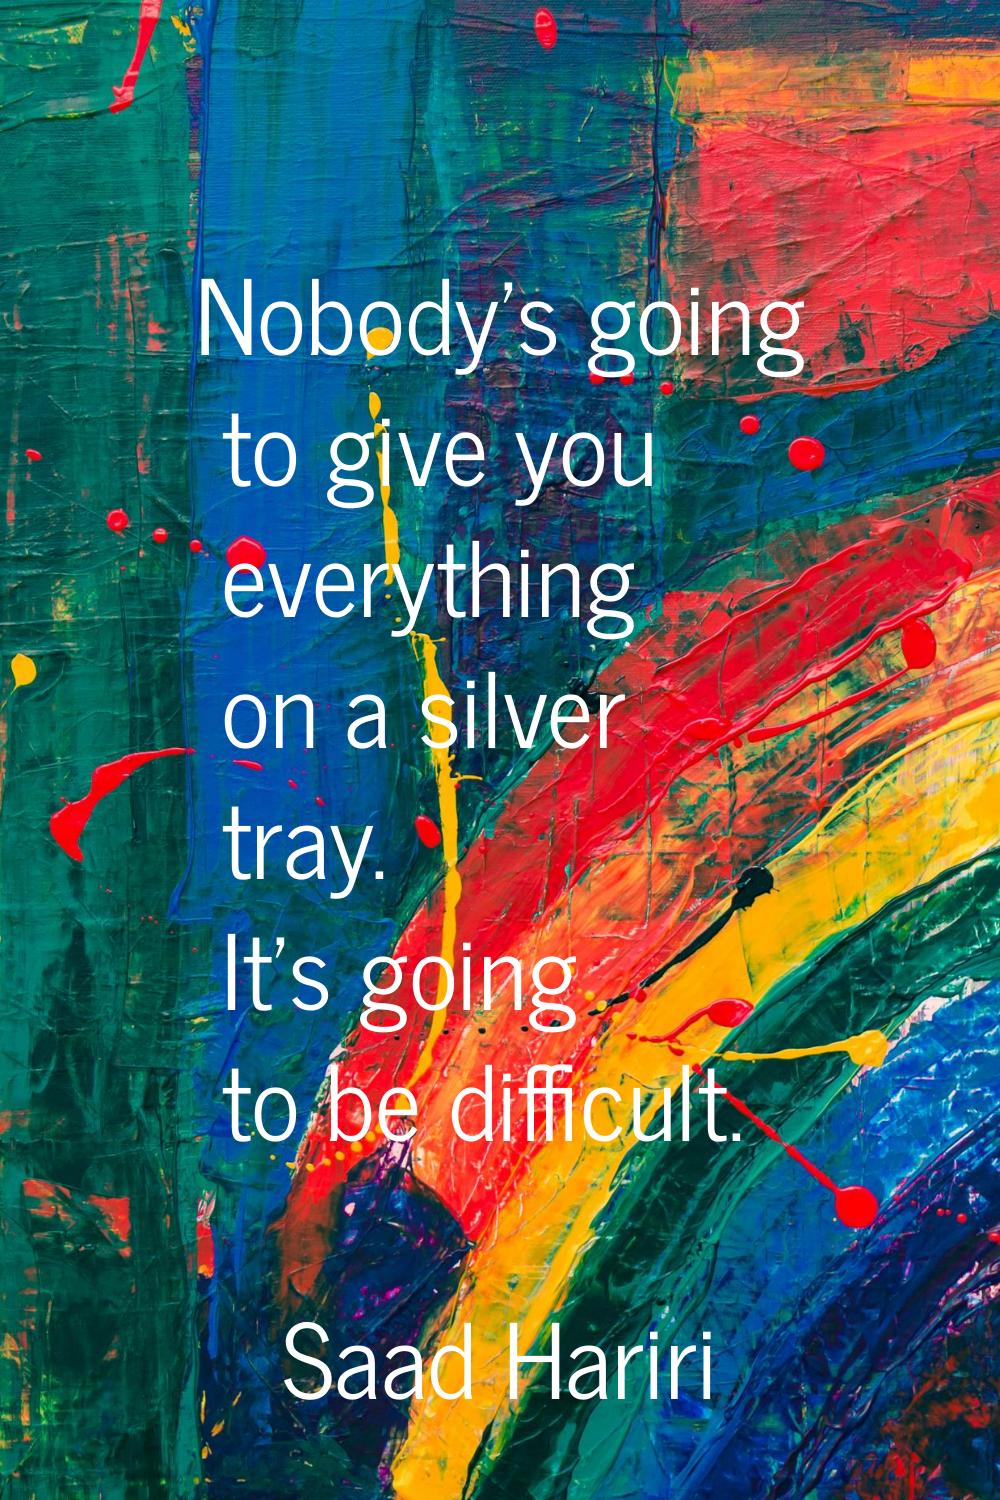 Nobody's going to give you everything on a silver tray. It's going to be difficult.